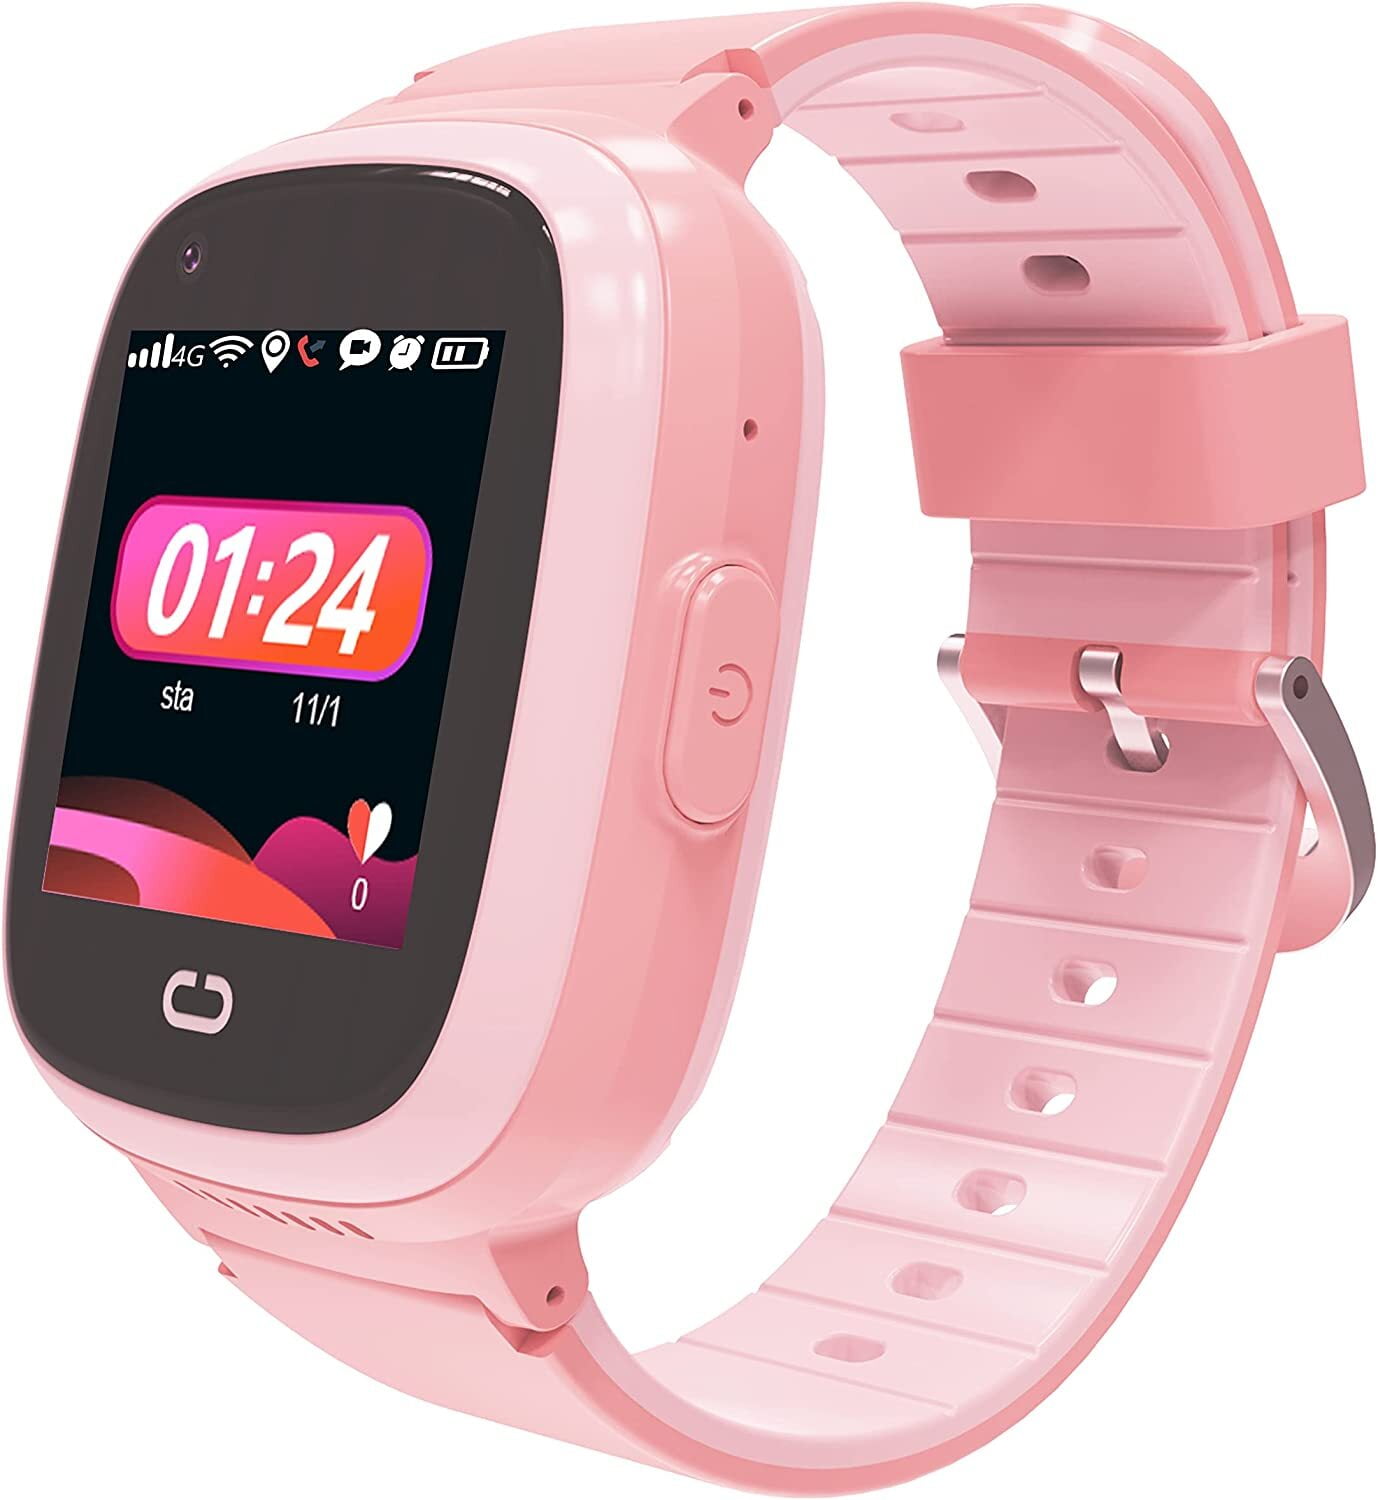 PTHTECHUS Kids Smartwatch with GPS 4G Touchscreen Watch with Phone GPS Tracker Real-Time Location Video Call Voice Chat Camera Waterproof Android and iOS for Boys Girls Gift Pink - Walmart.com